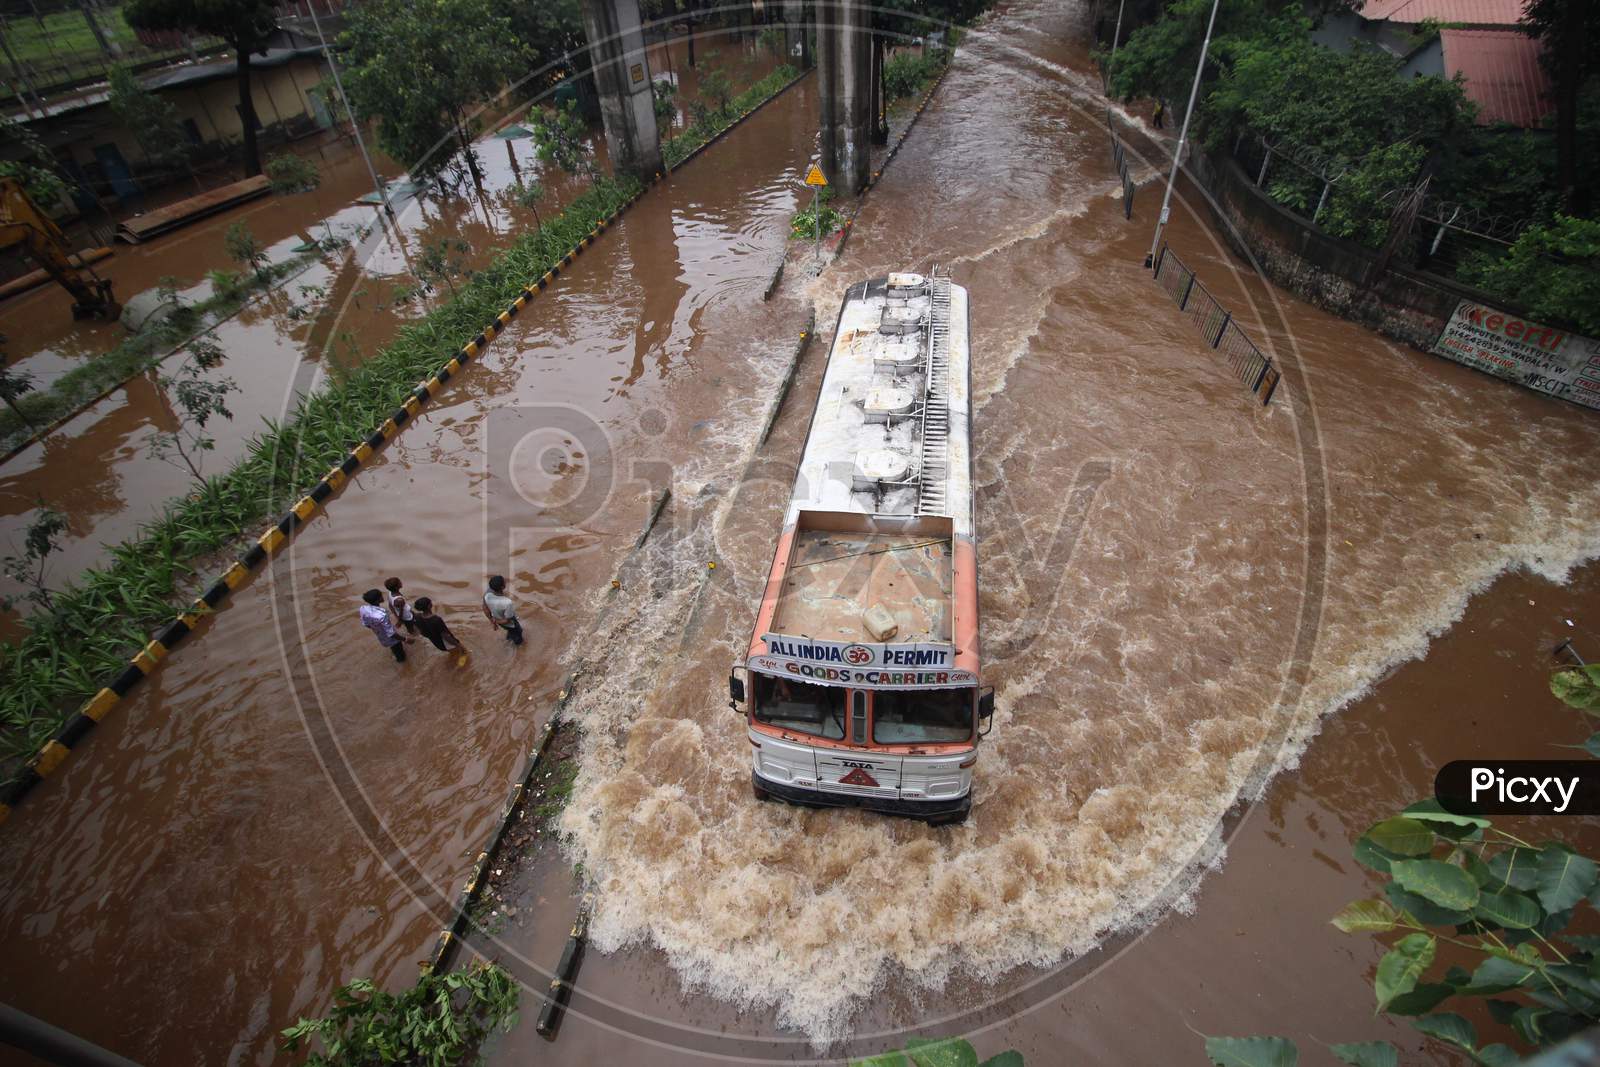 A vehicle passes through a waterlogged road during rains, in Mumbai, India on August 4, 2020.